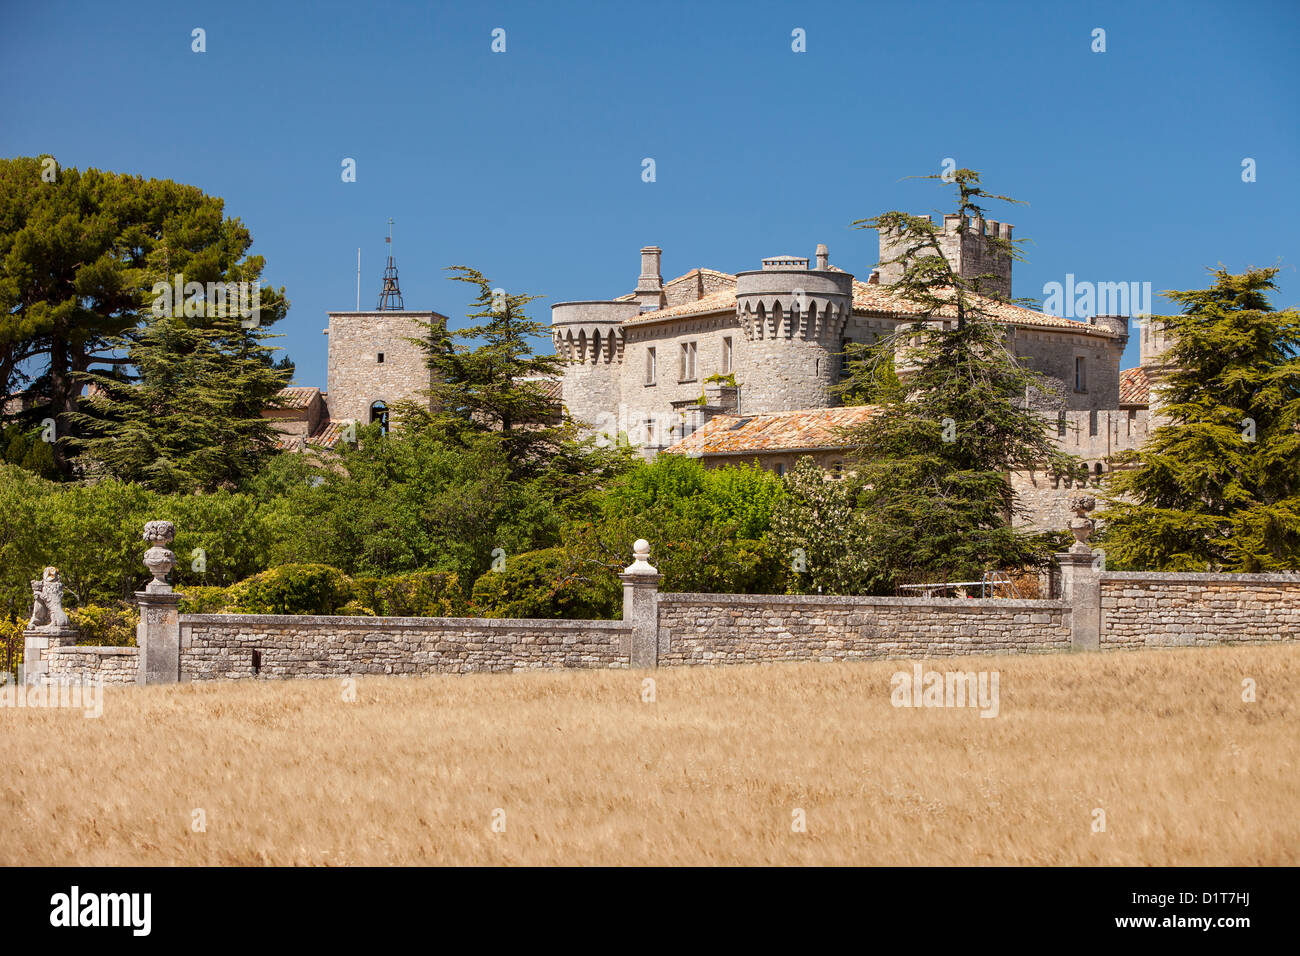 Private castle in town of Murs in the Vaucluse, Provence France Stock Photo